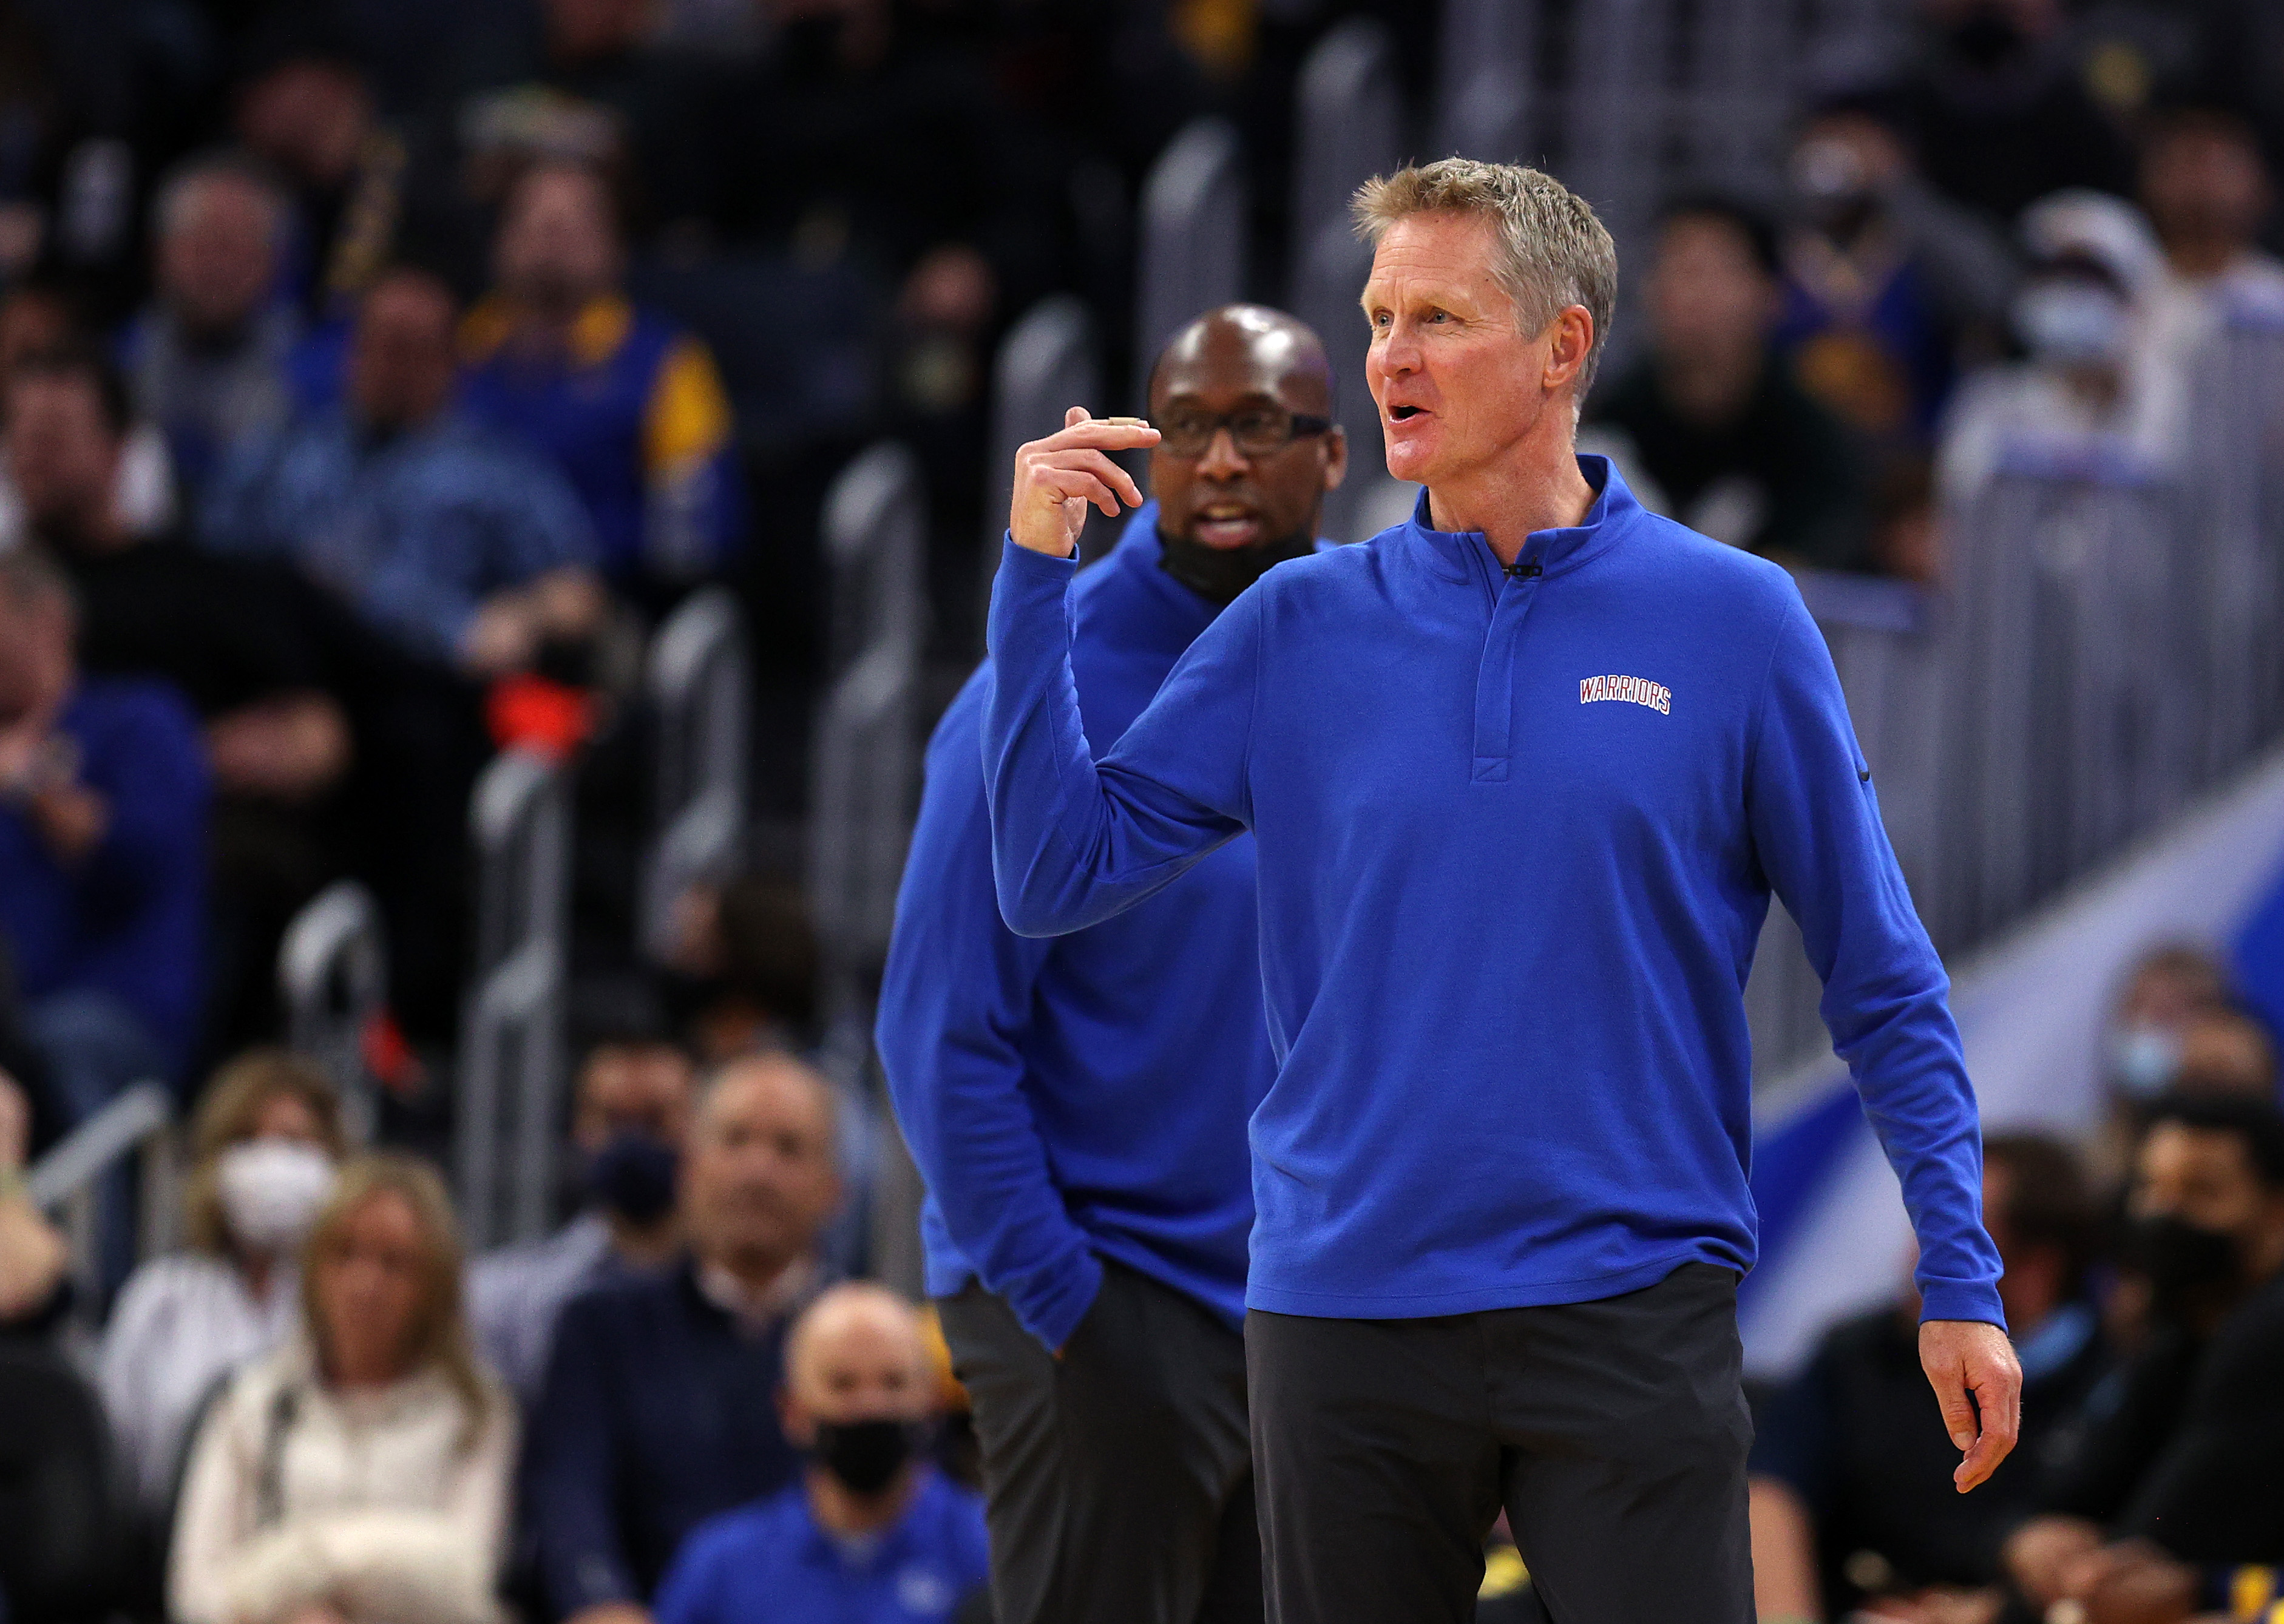 Steve Kerr roaming the sideline with Mike Brown in the background